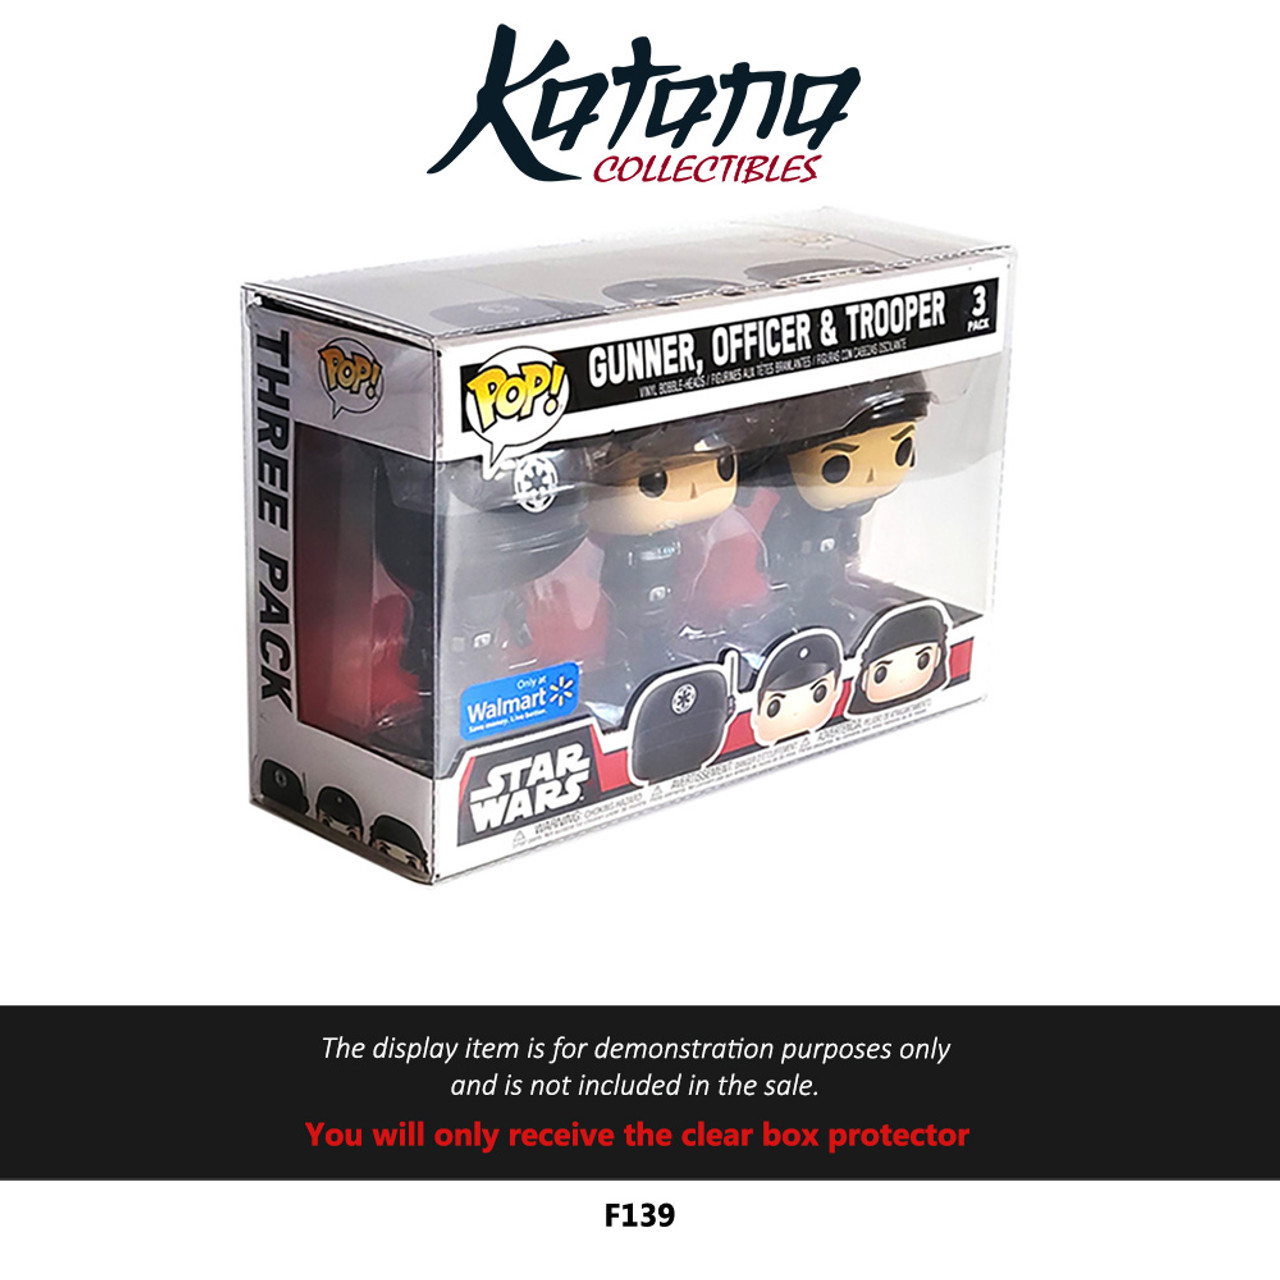 Katana Collectibles Protector For Funko POP 3-pack Star Wars Gunner, Officer & Trooper - Walmart Exclusive